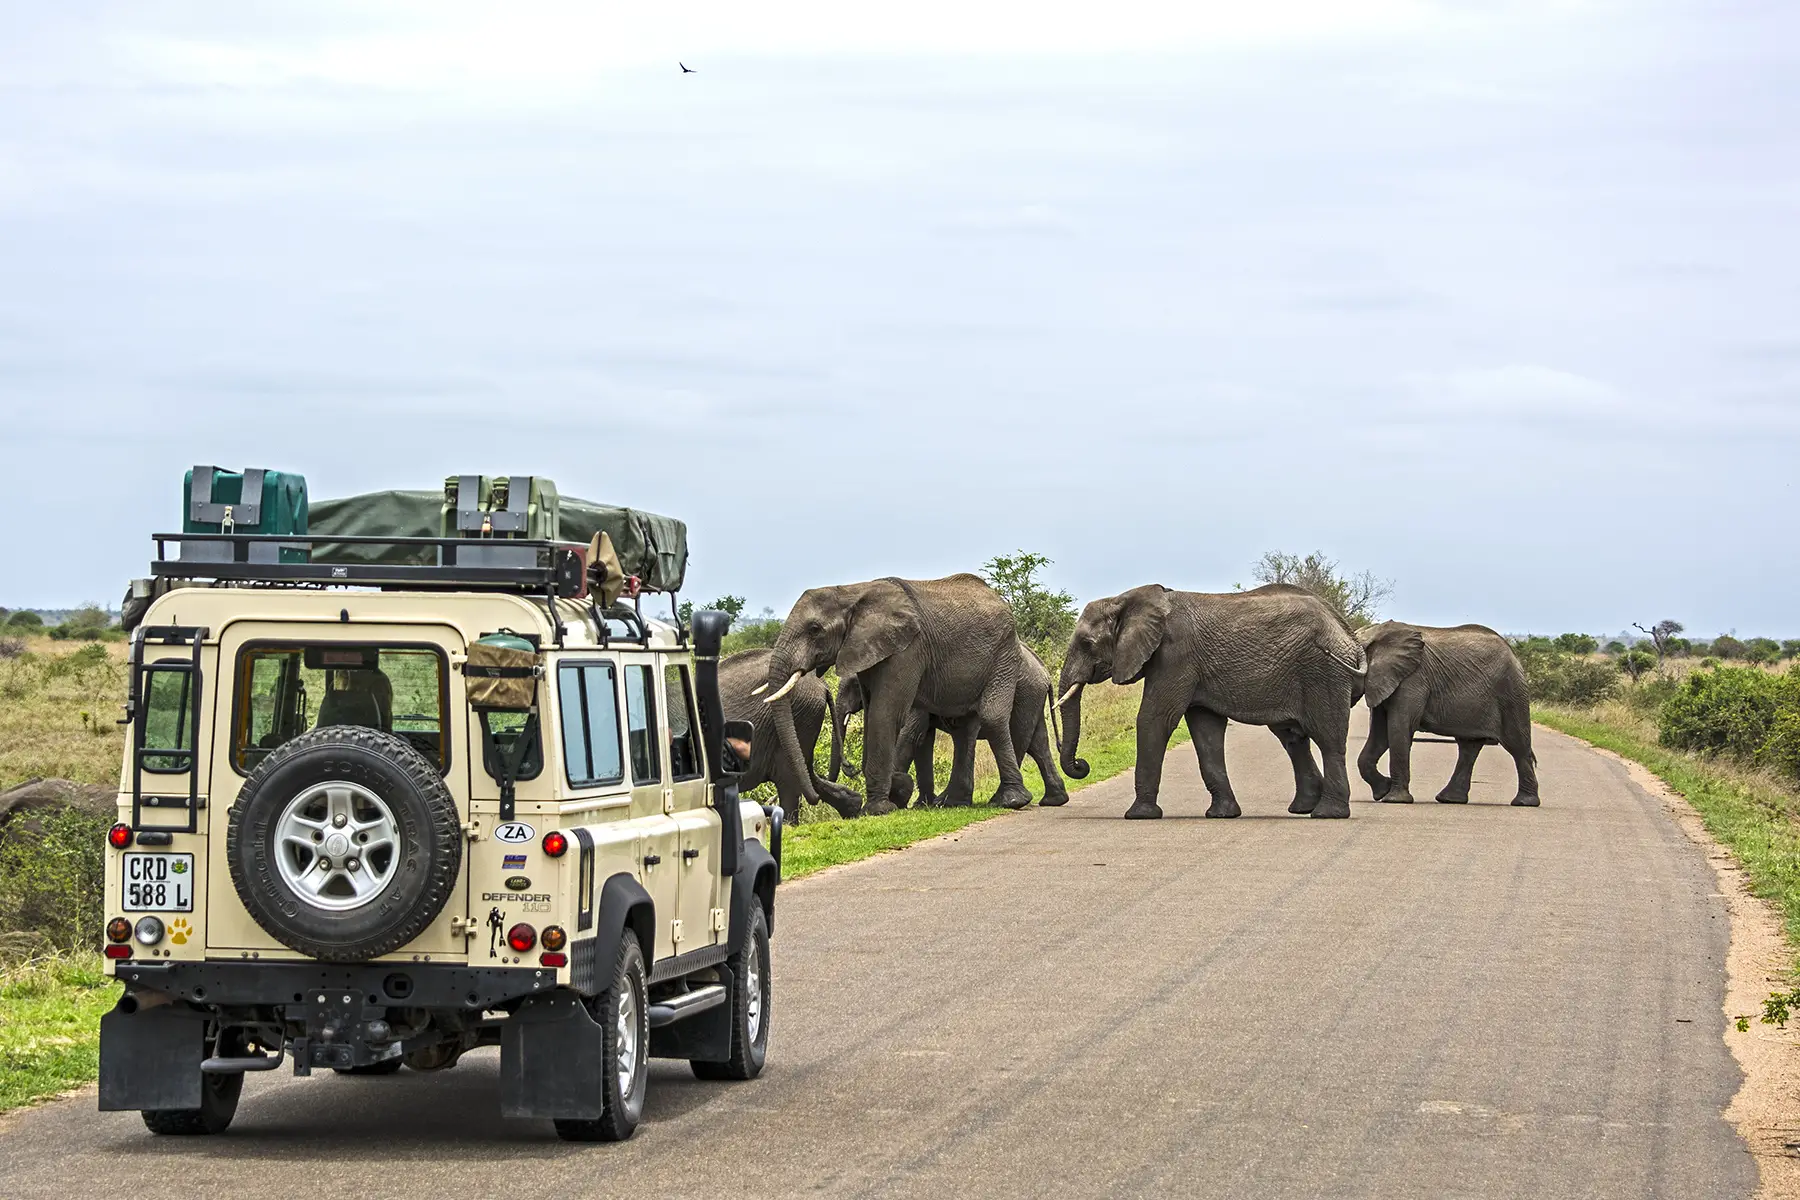 Landrover waiting for elephants to cross road in Kruger National Park